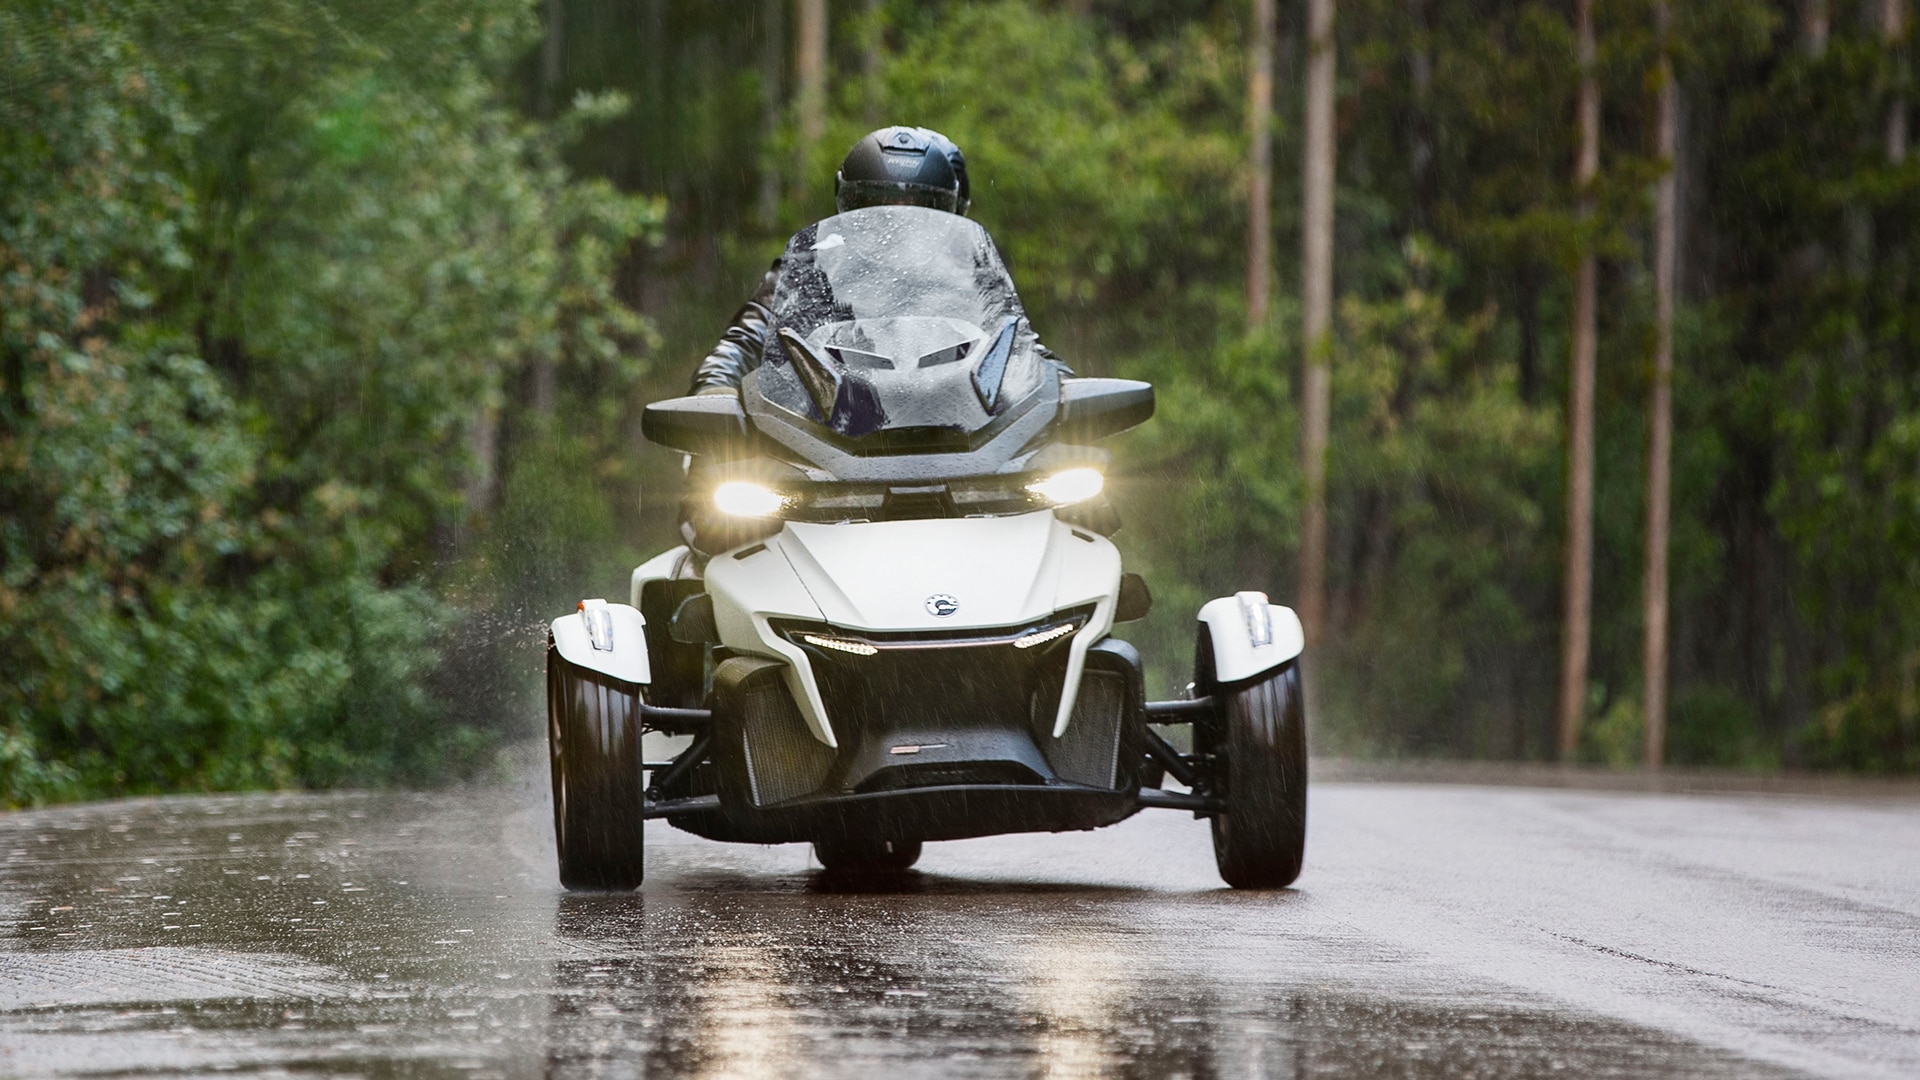 Can-Am Spyder RT riding in the rain